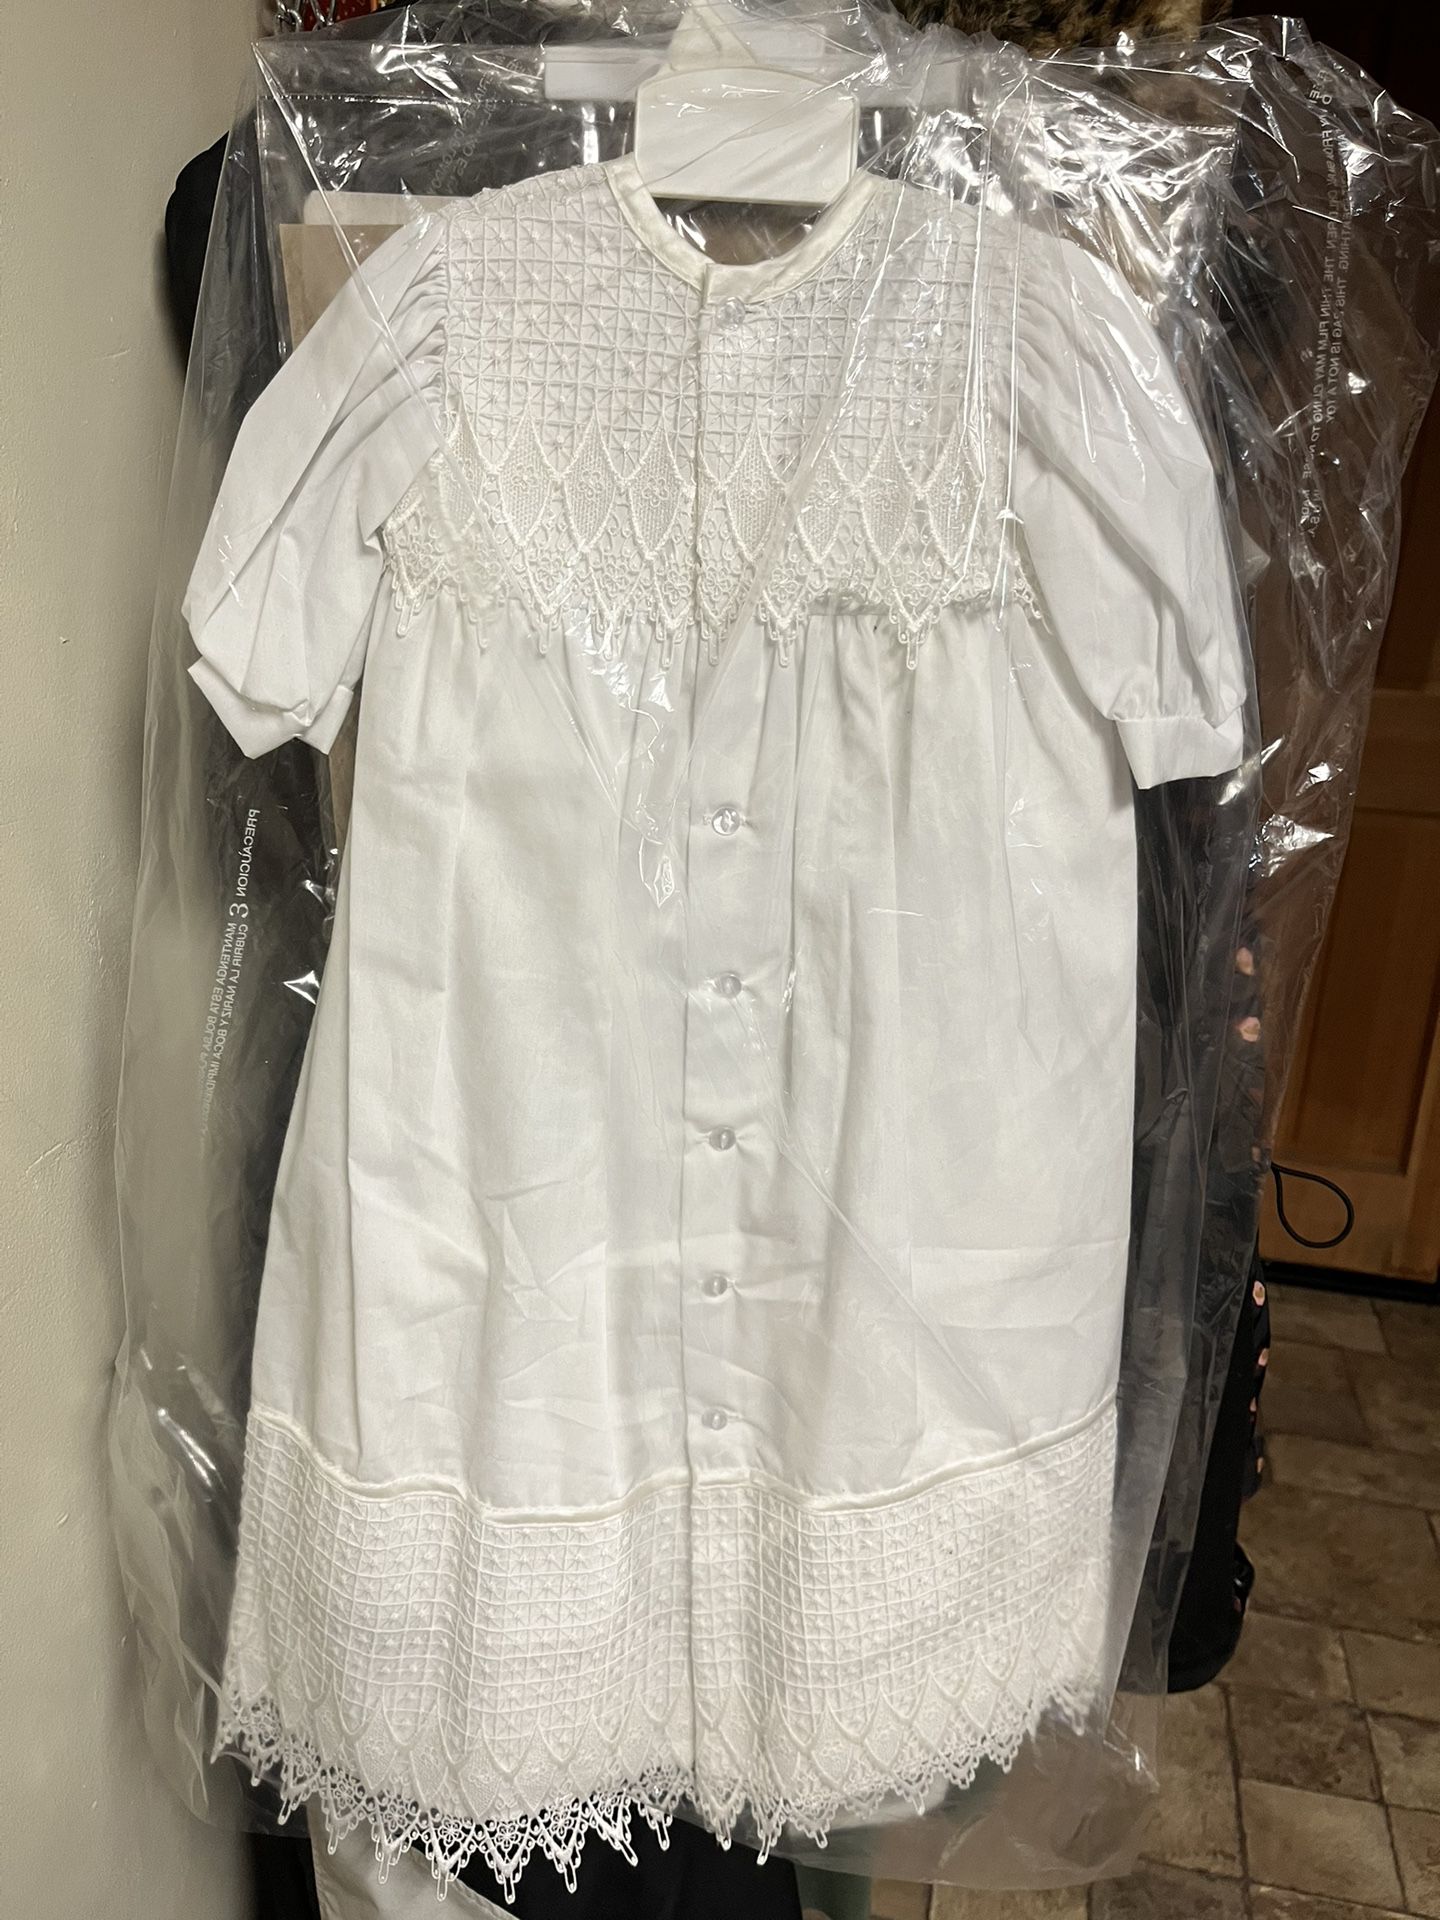 Brand New Christening Outfit: Dress 6-12 Months, Shoes, Bib, And Shawl